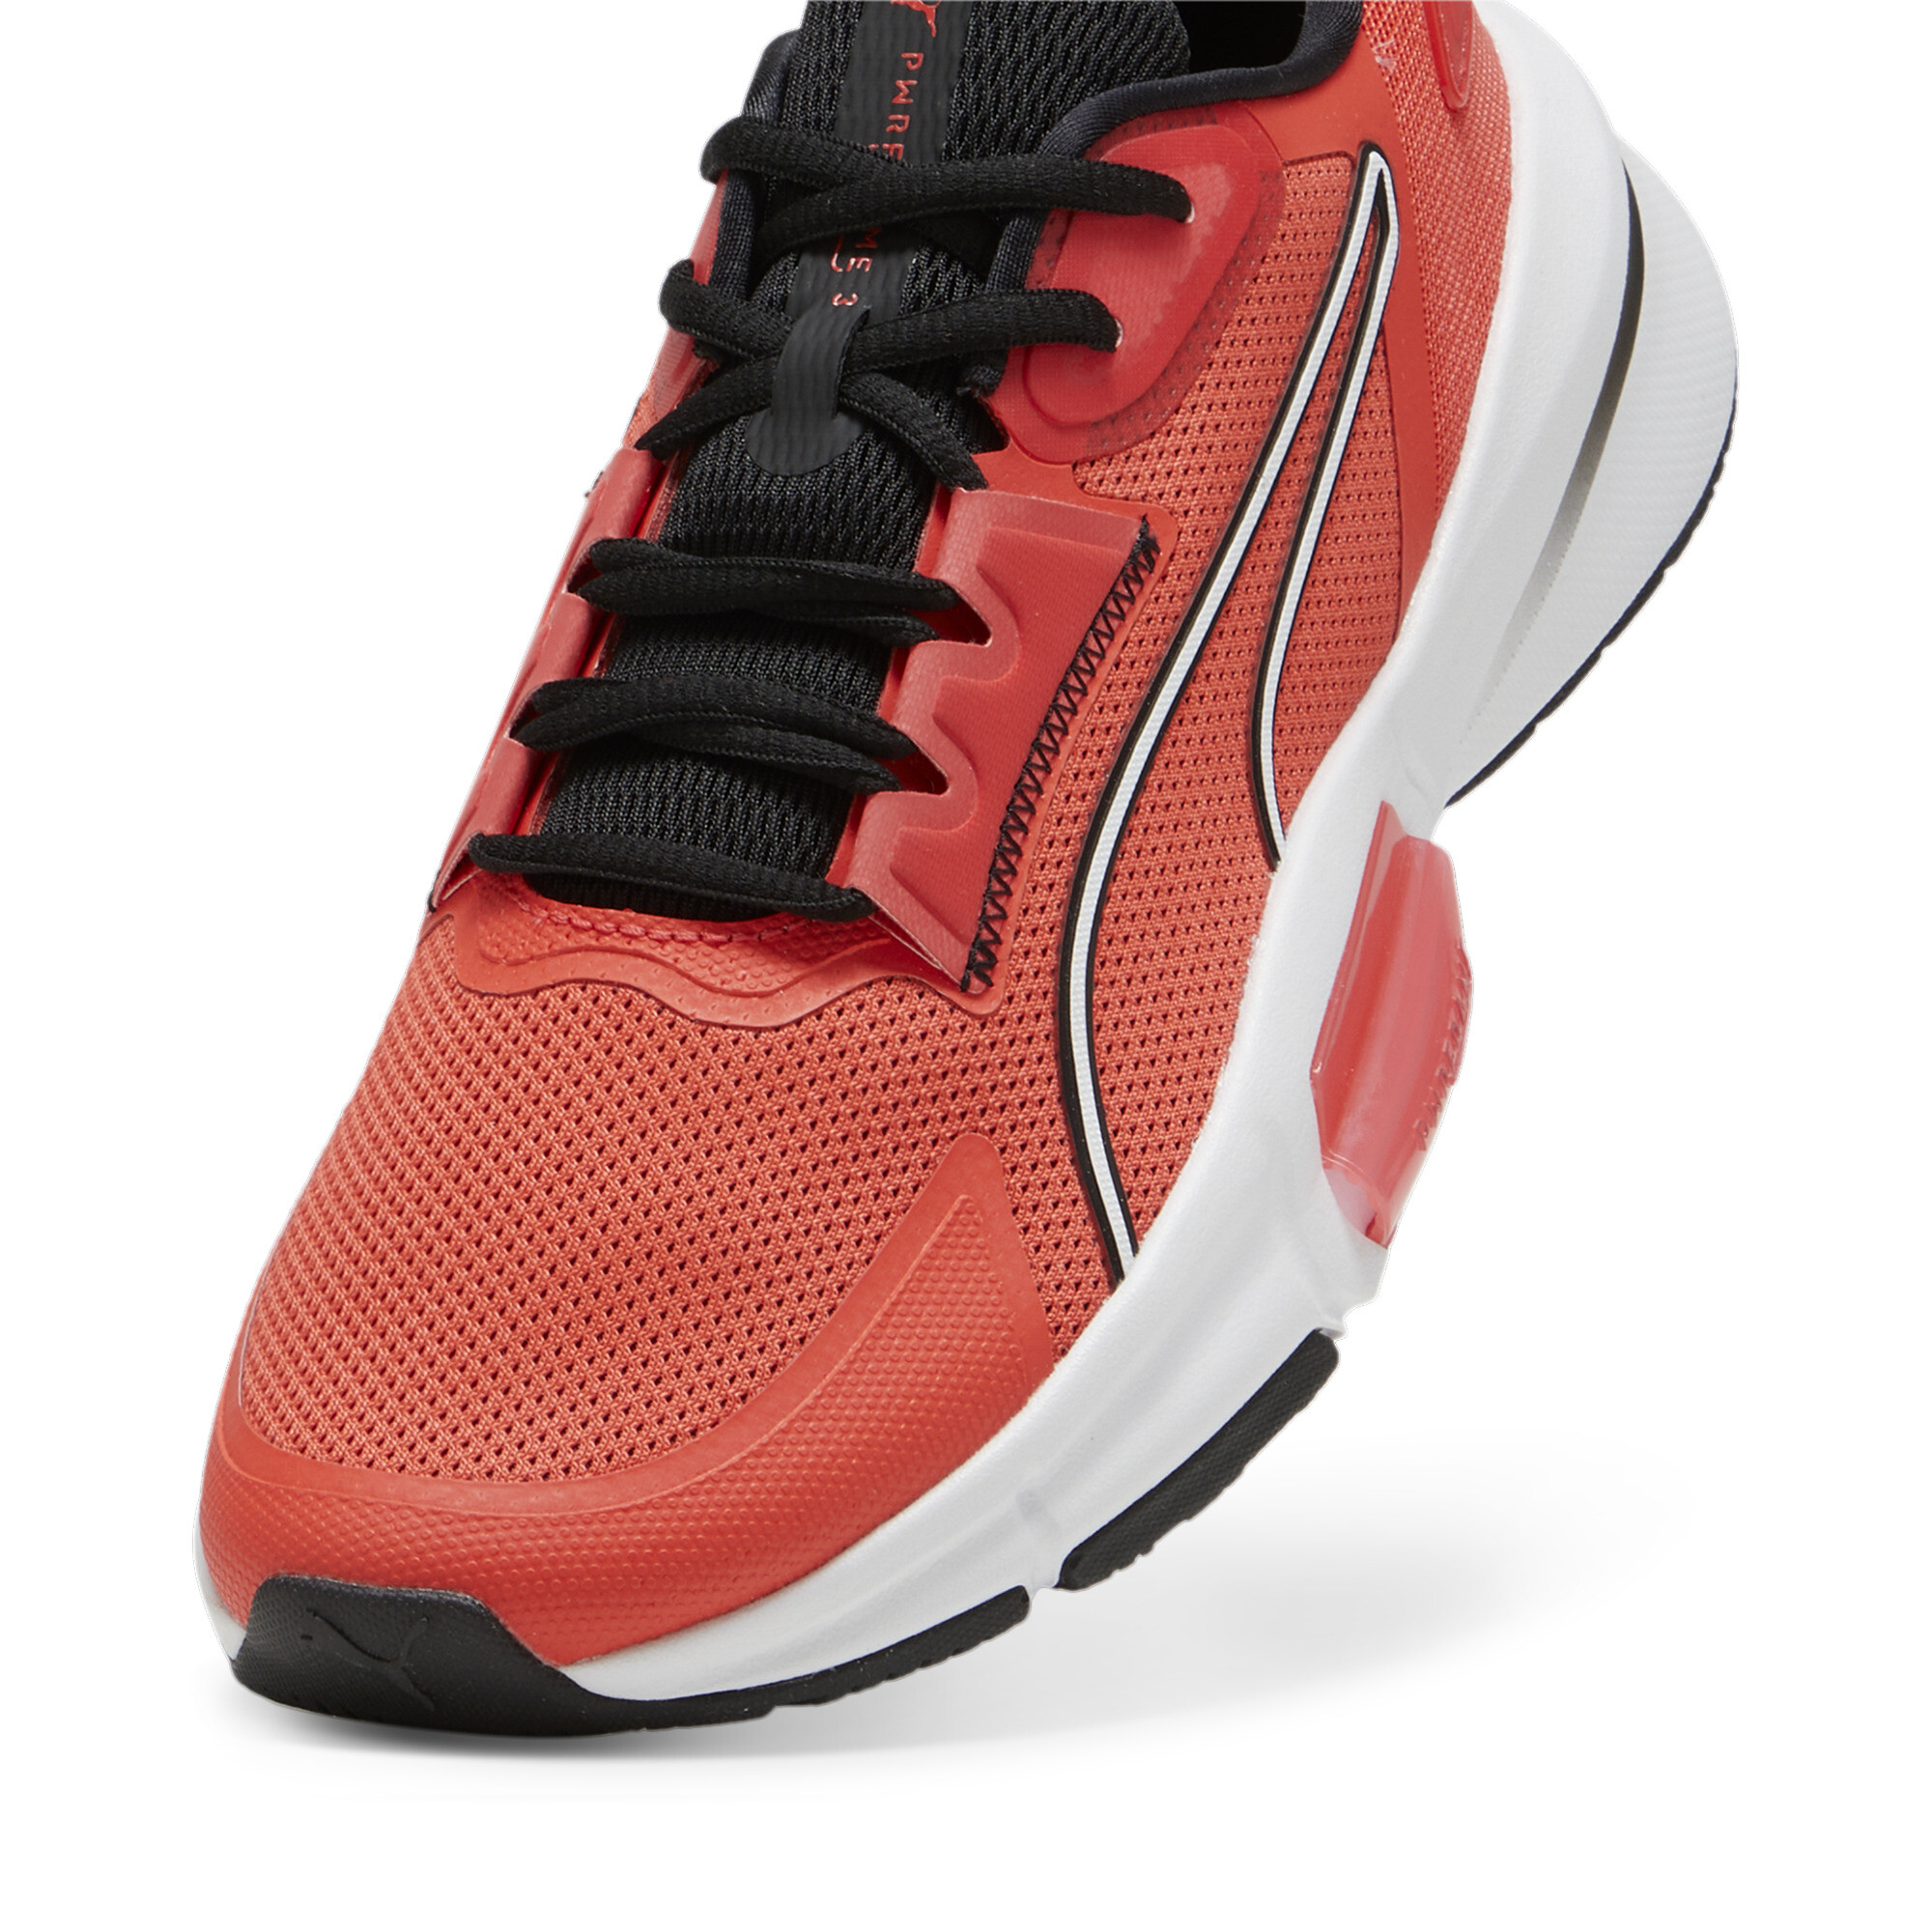 Men's PUMA PWRFrame TR 3 Training Shoes In Red, Size EU 42.5